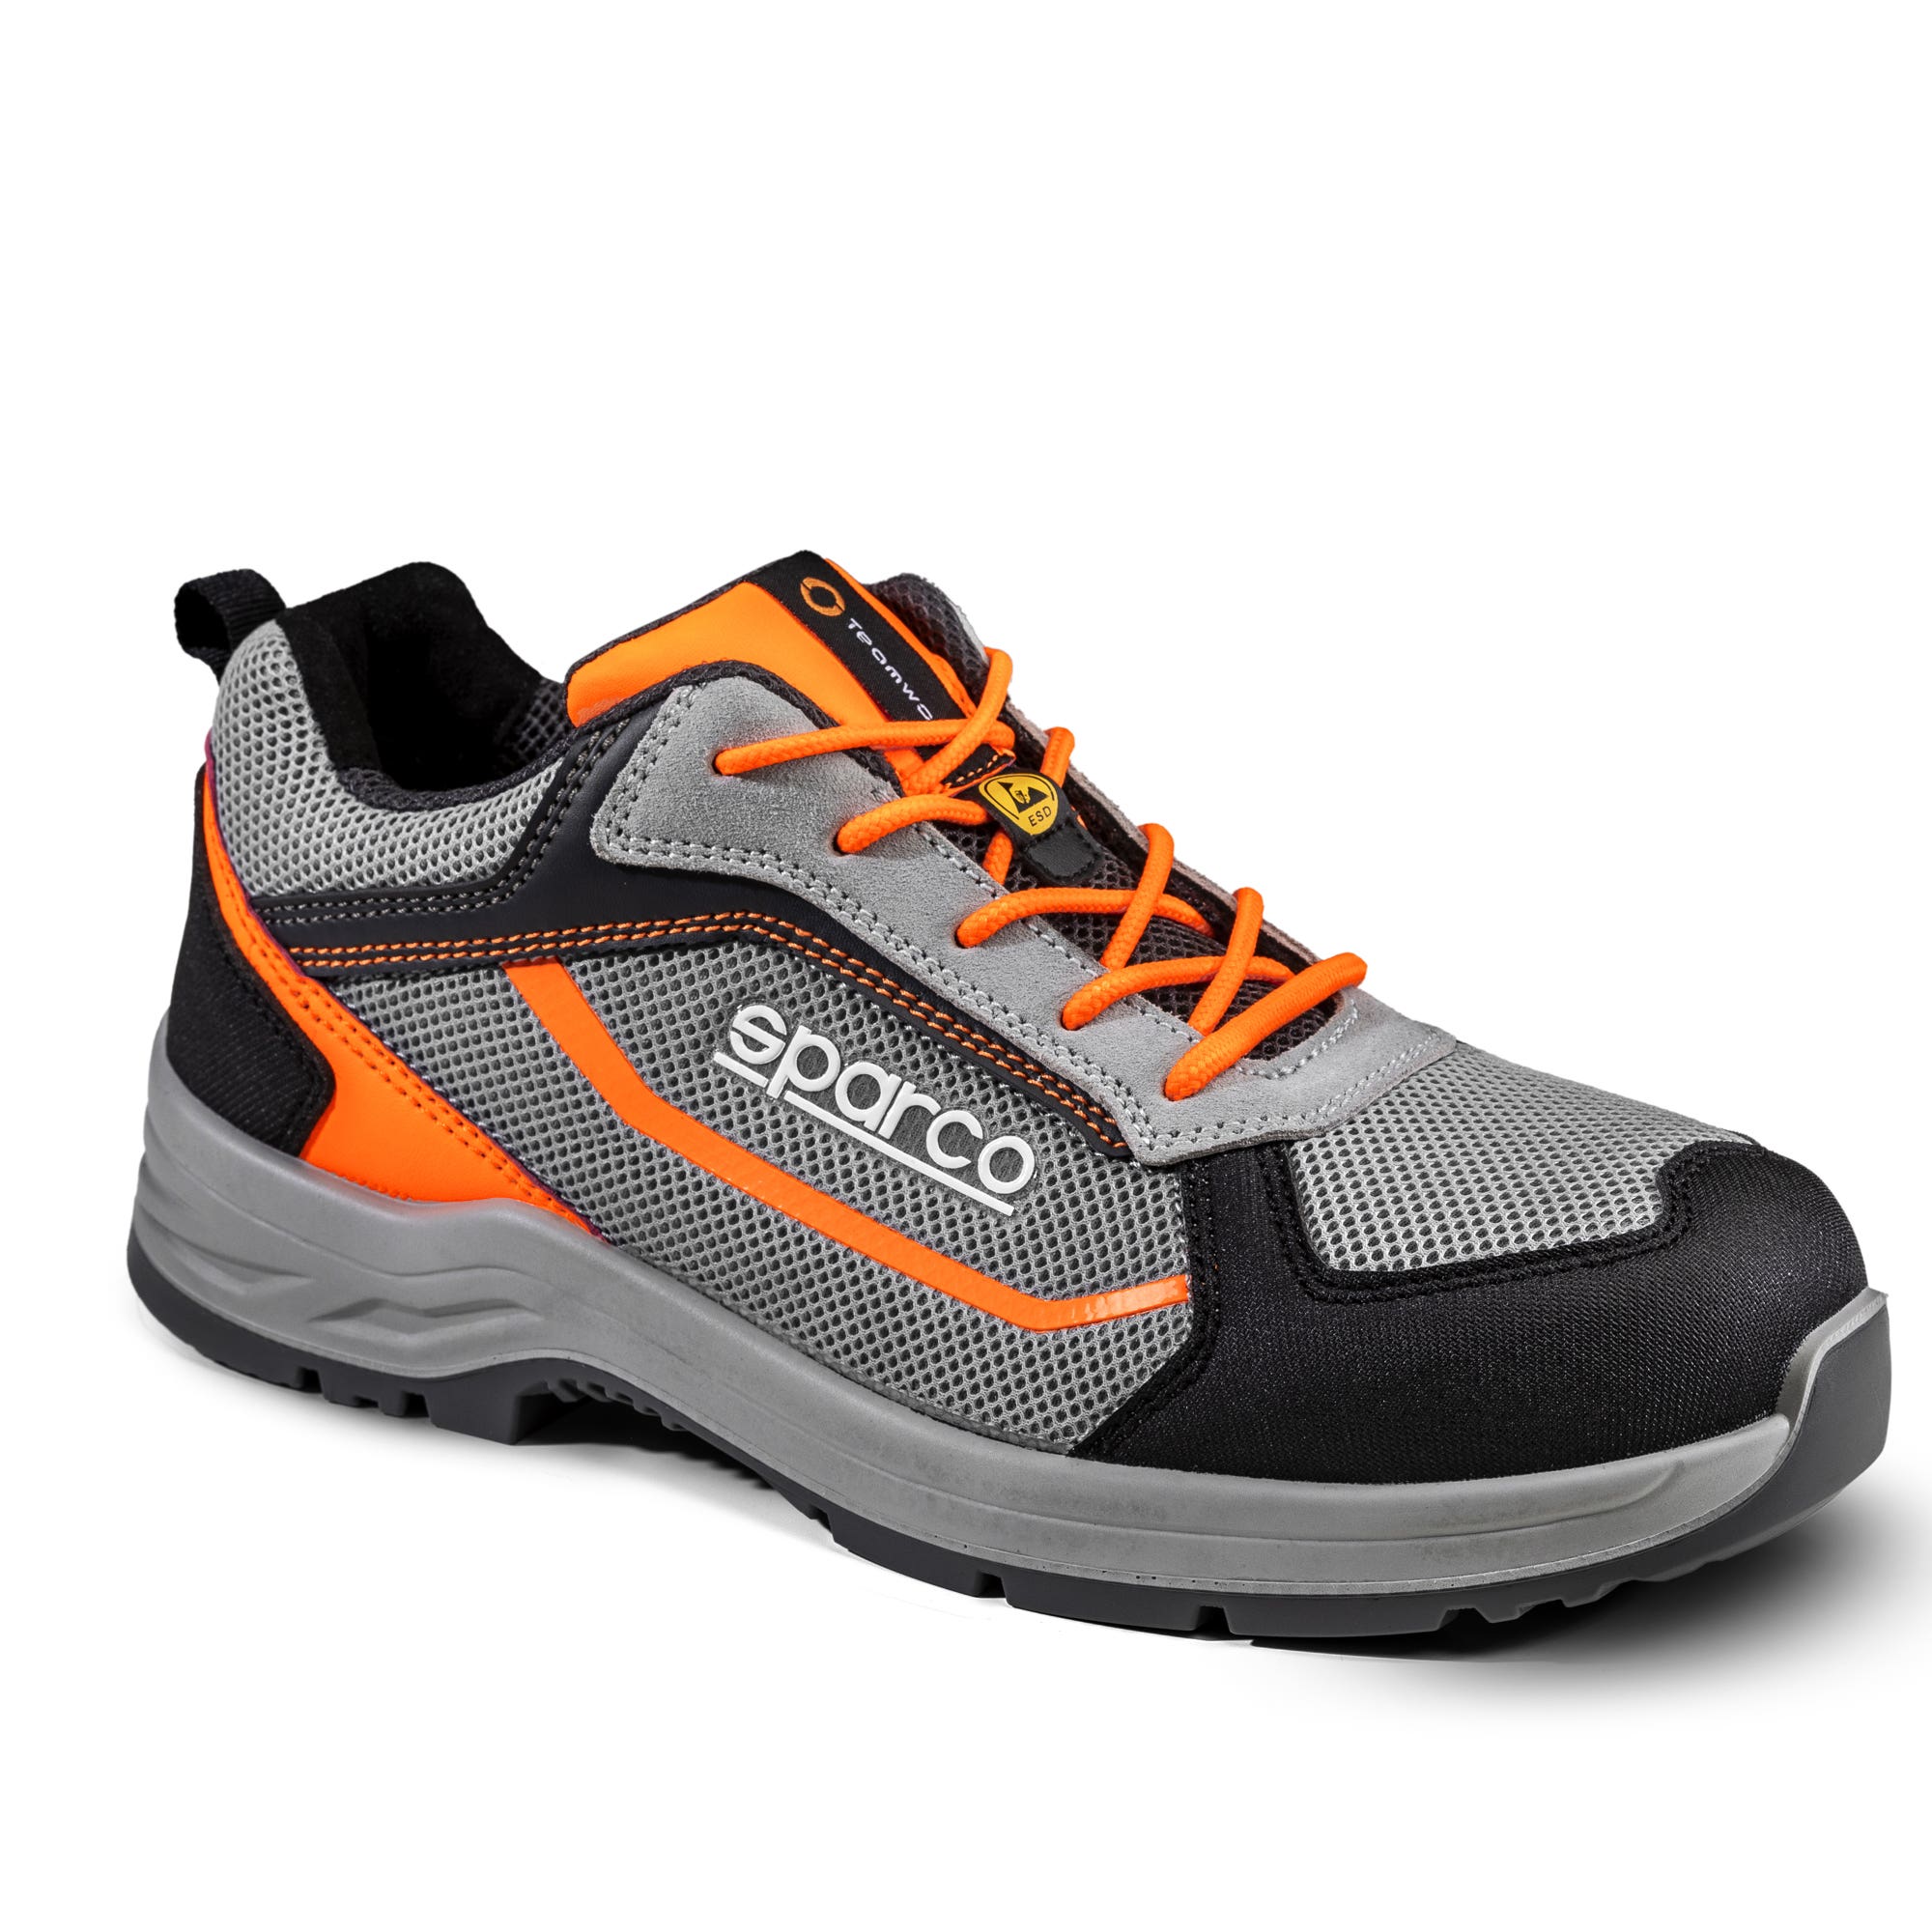 NDIS SCARPA INDY-R S1P ESD TG 35 GR